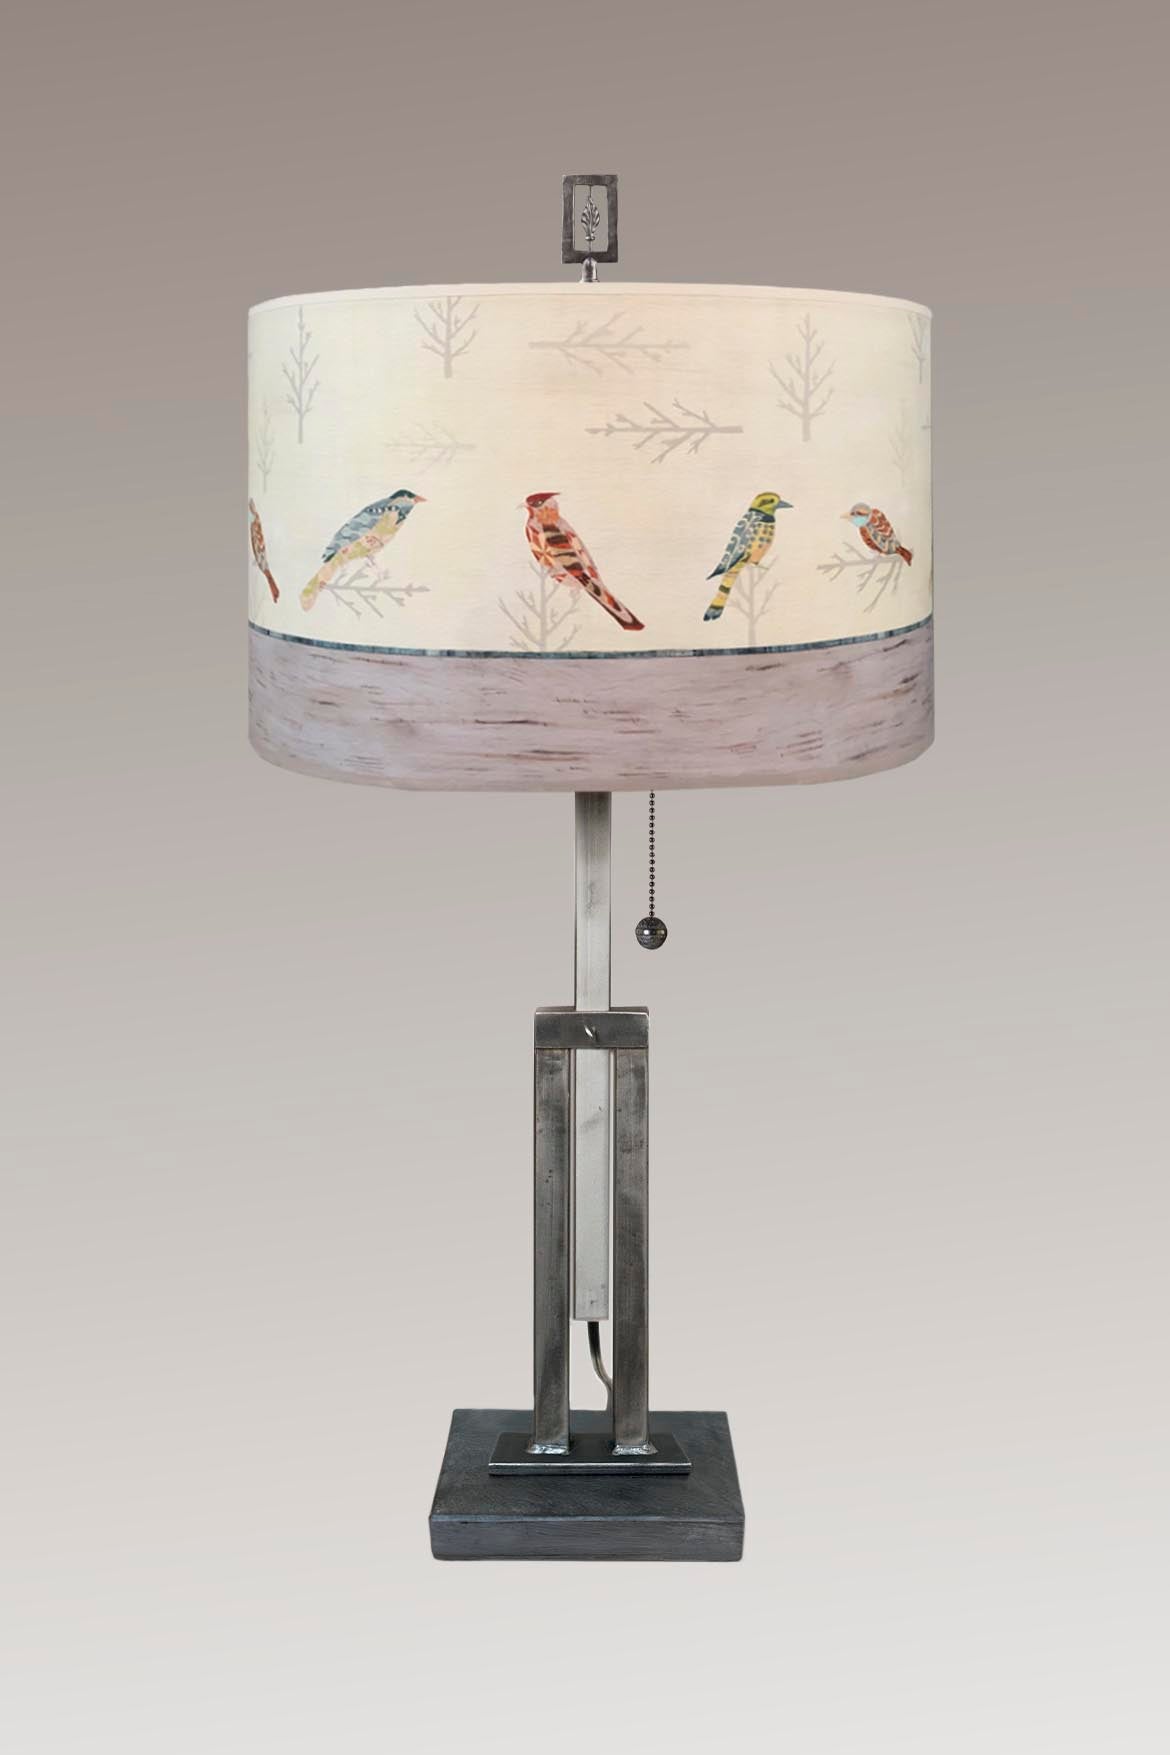 Janna Ugone & Co Table Lamps Adjustable-Height Steel Table Lamp with Large Drum Shade in Bird Friends